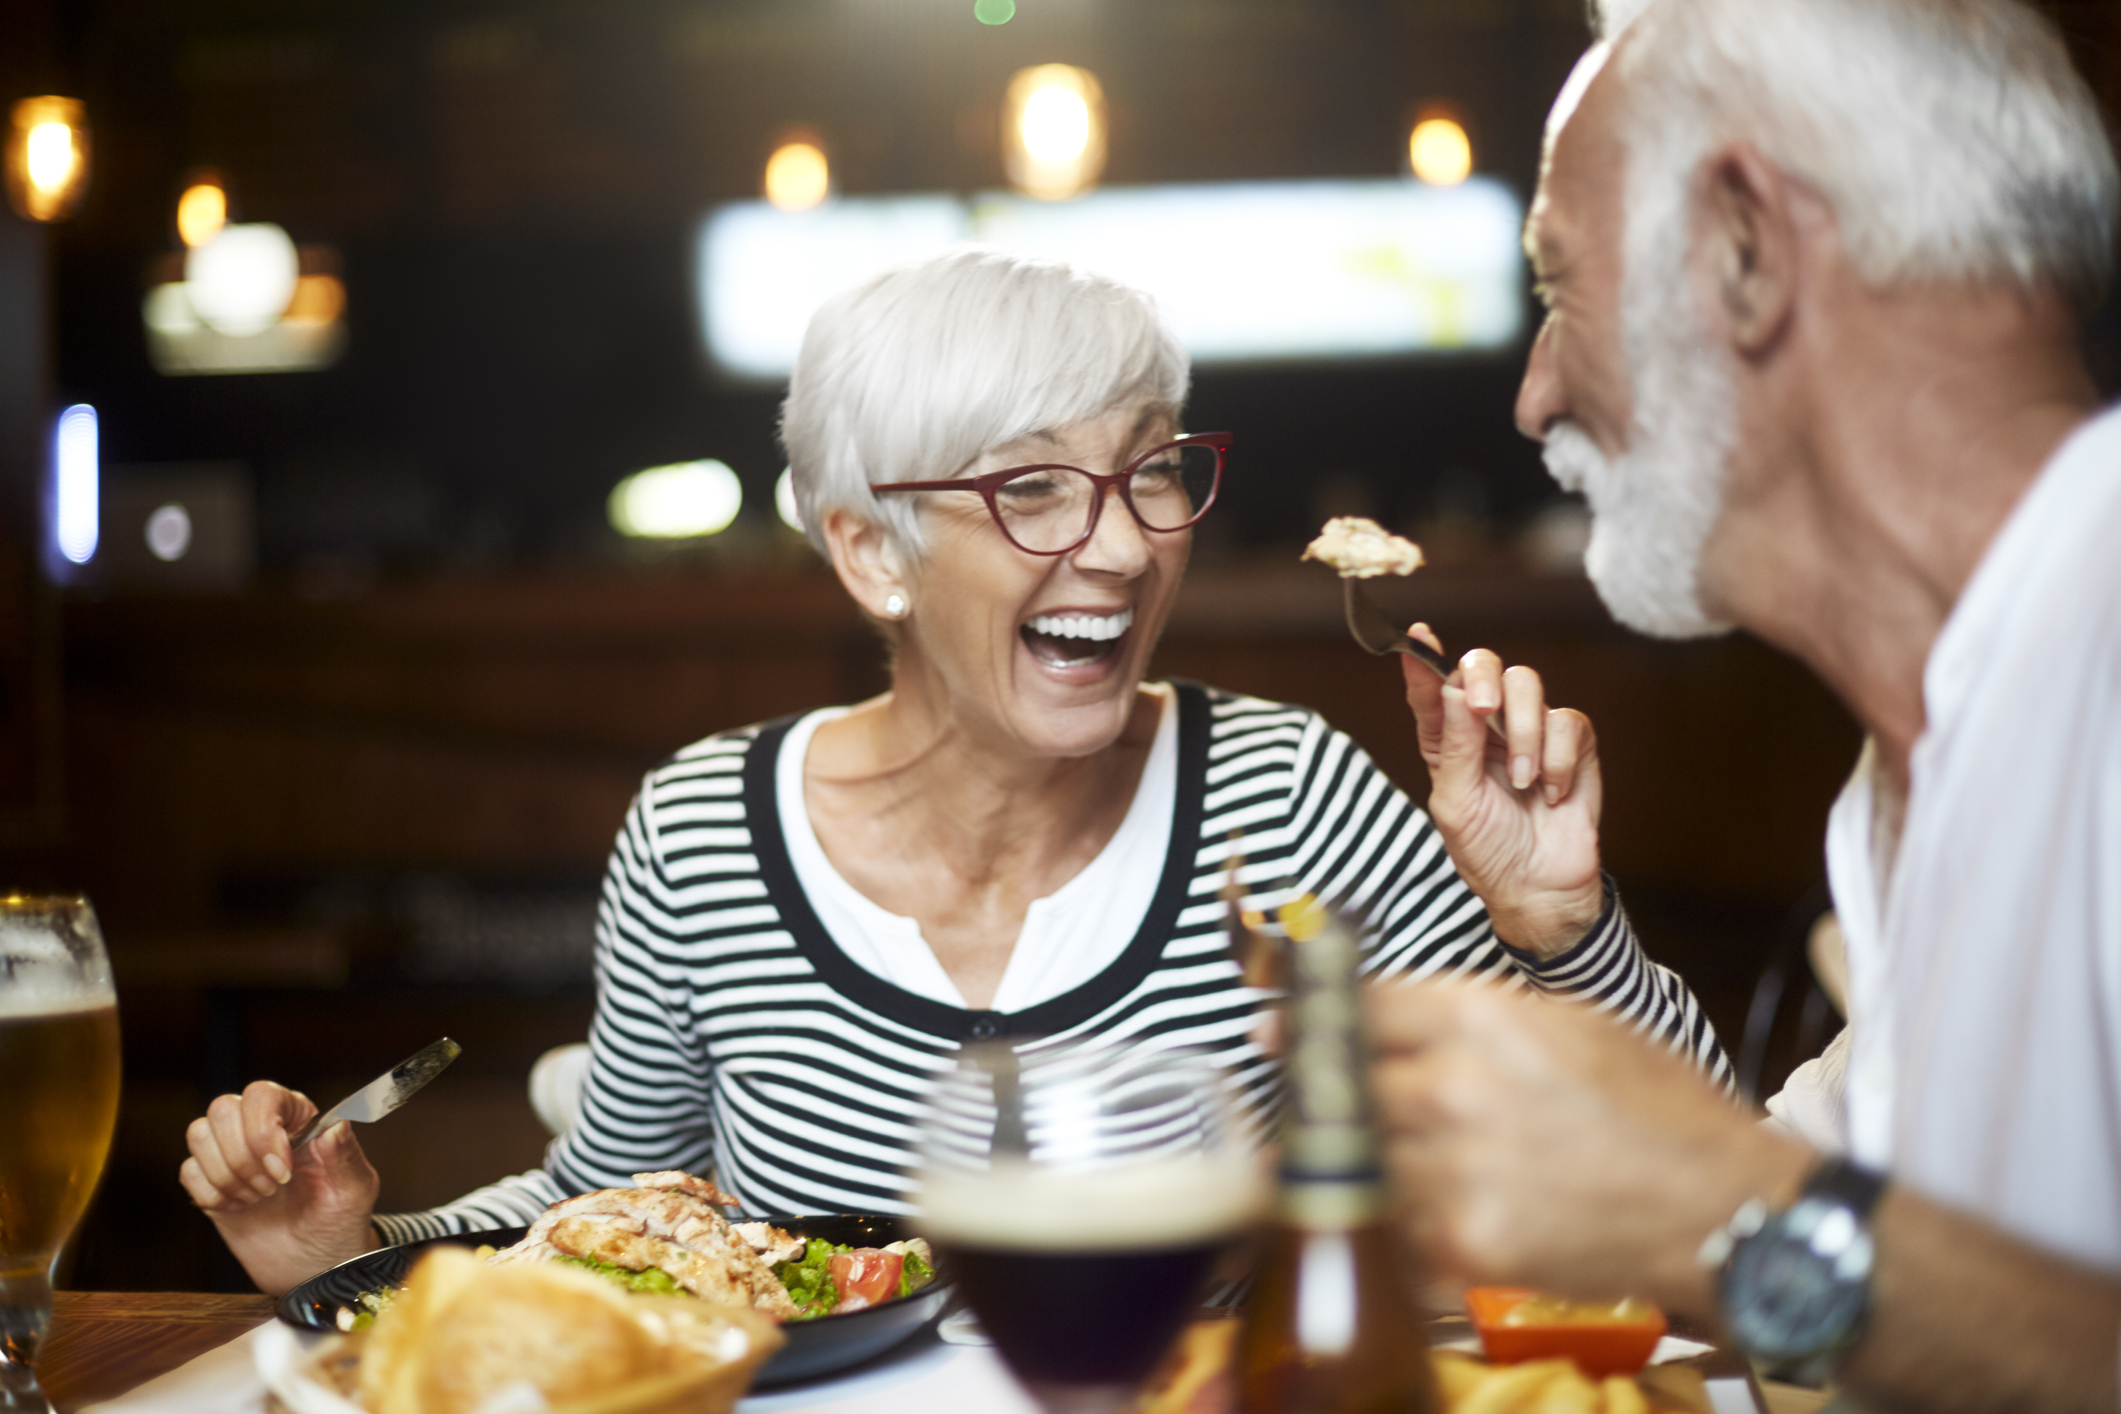 Elderly couple cheerfully feeding each other during a meal in a restaurant.